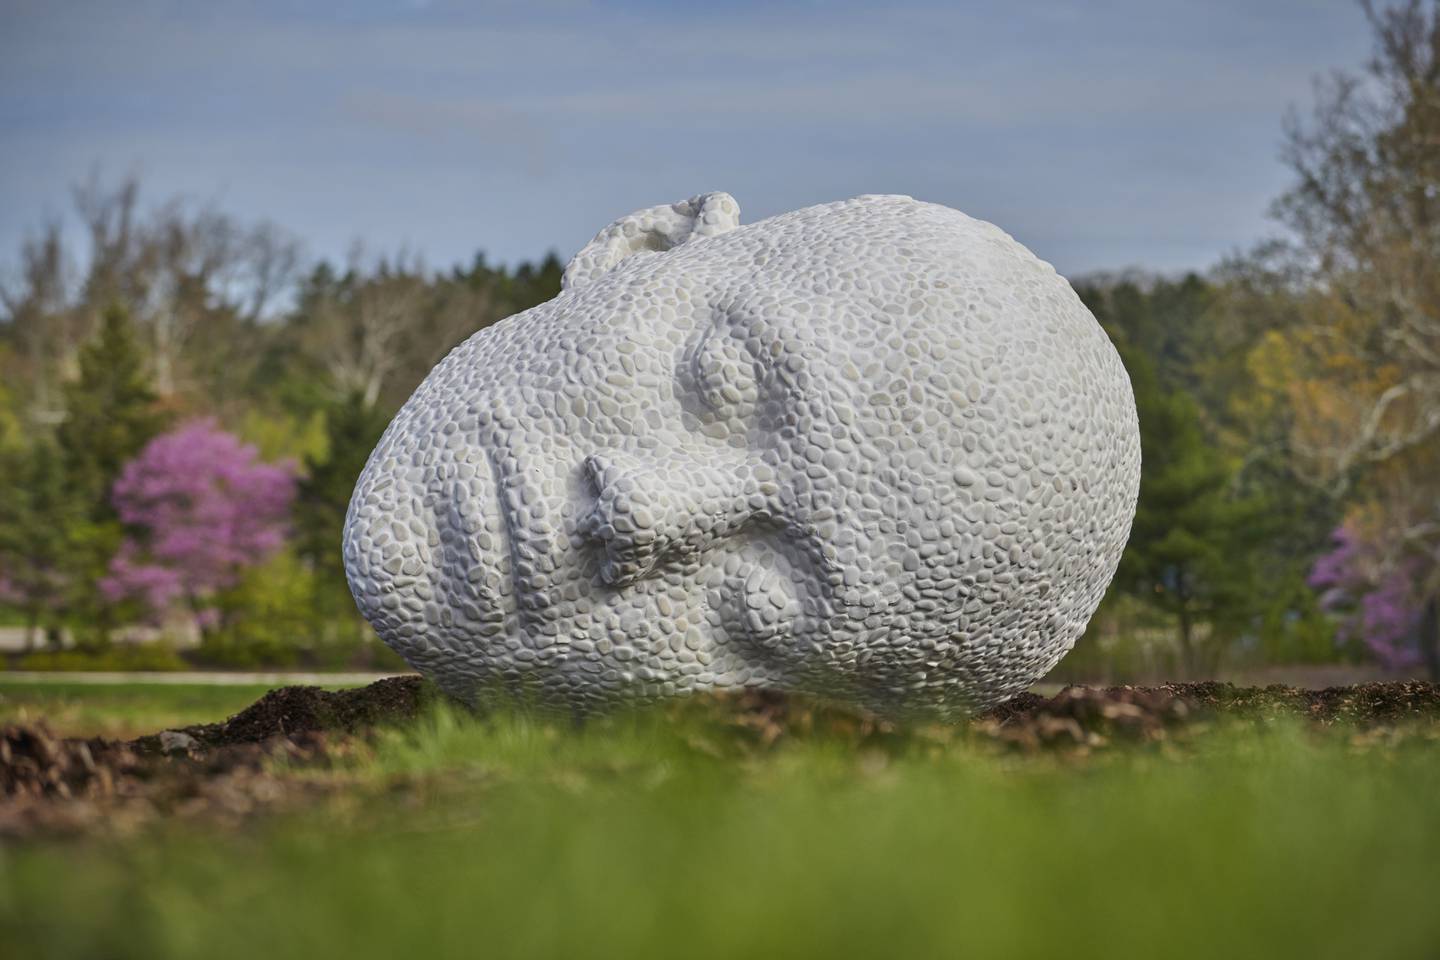 Hear: Of the Earth is now one of several sculptures on display at The Morton Arboretum in Lisle.